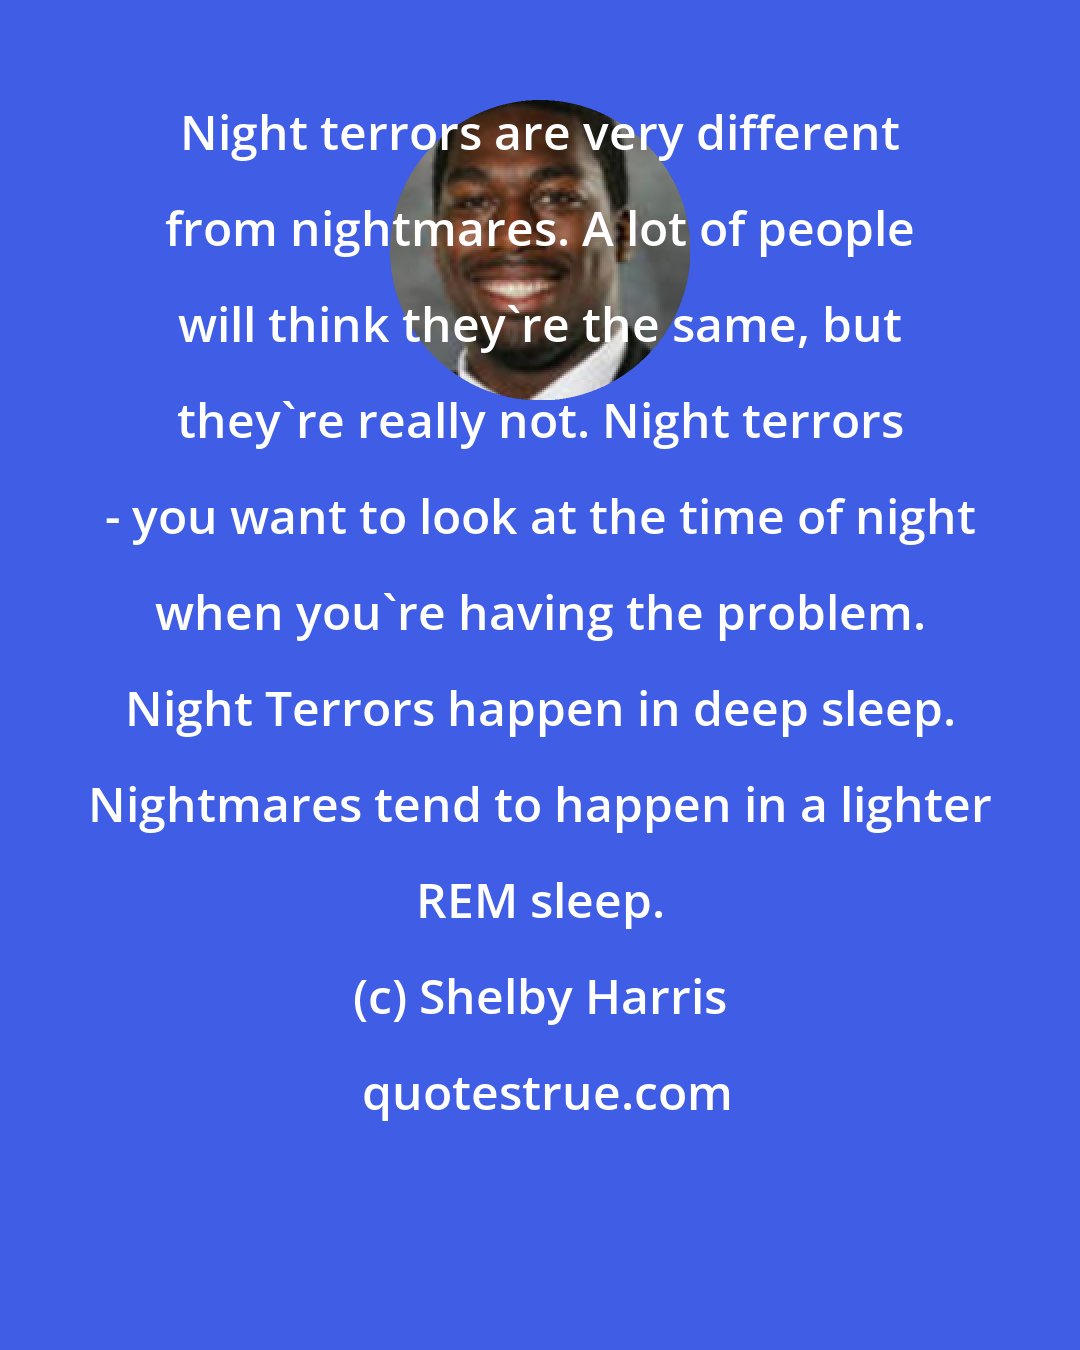 Shelby Harris: Night terrors are very different from nightmares. A lot of people will think they're the same, but they're really not. Night terrors - you want to look at the time of night when you're having the problem. Night Terrors happen in deep sleep. Nightmares tend to happen in a lighter REM sleep.